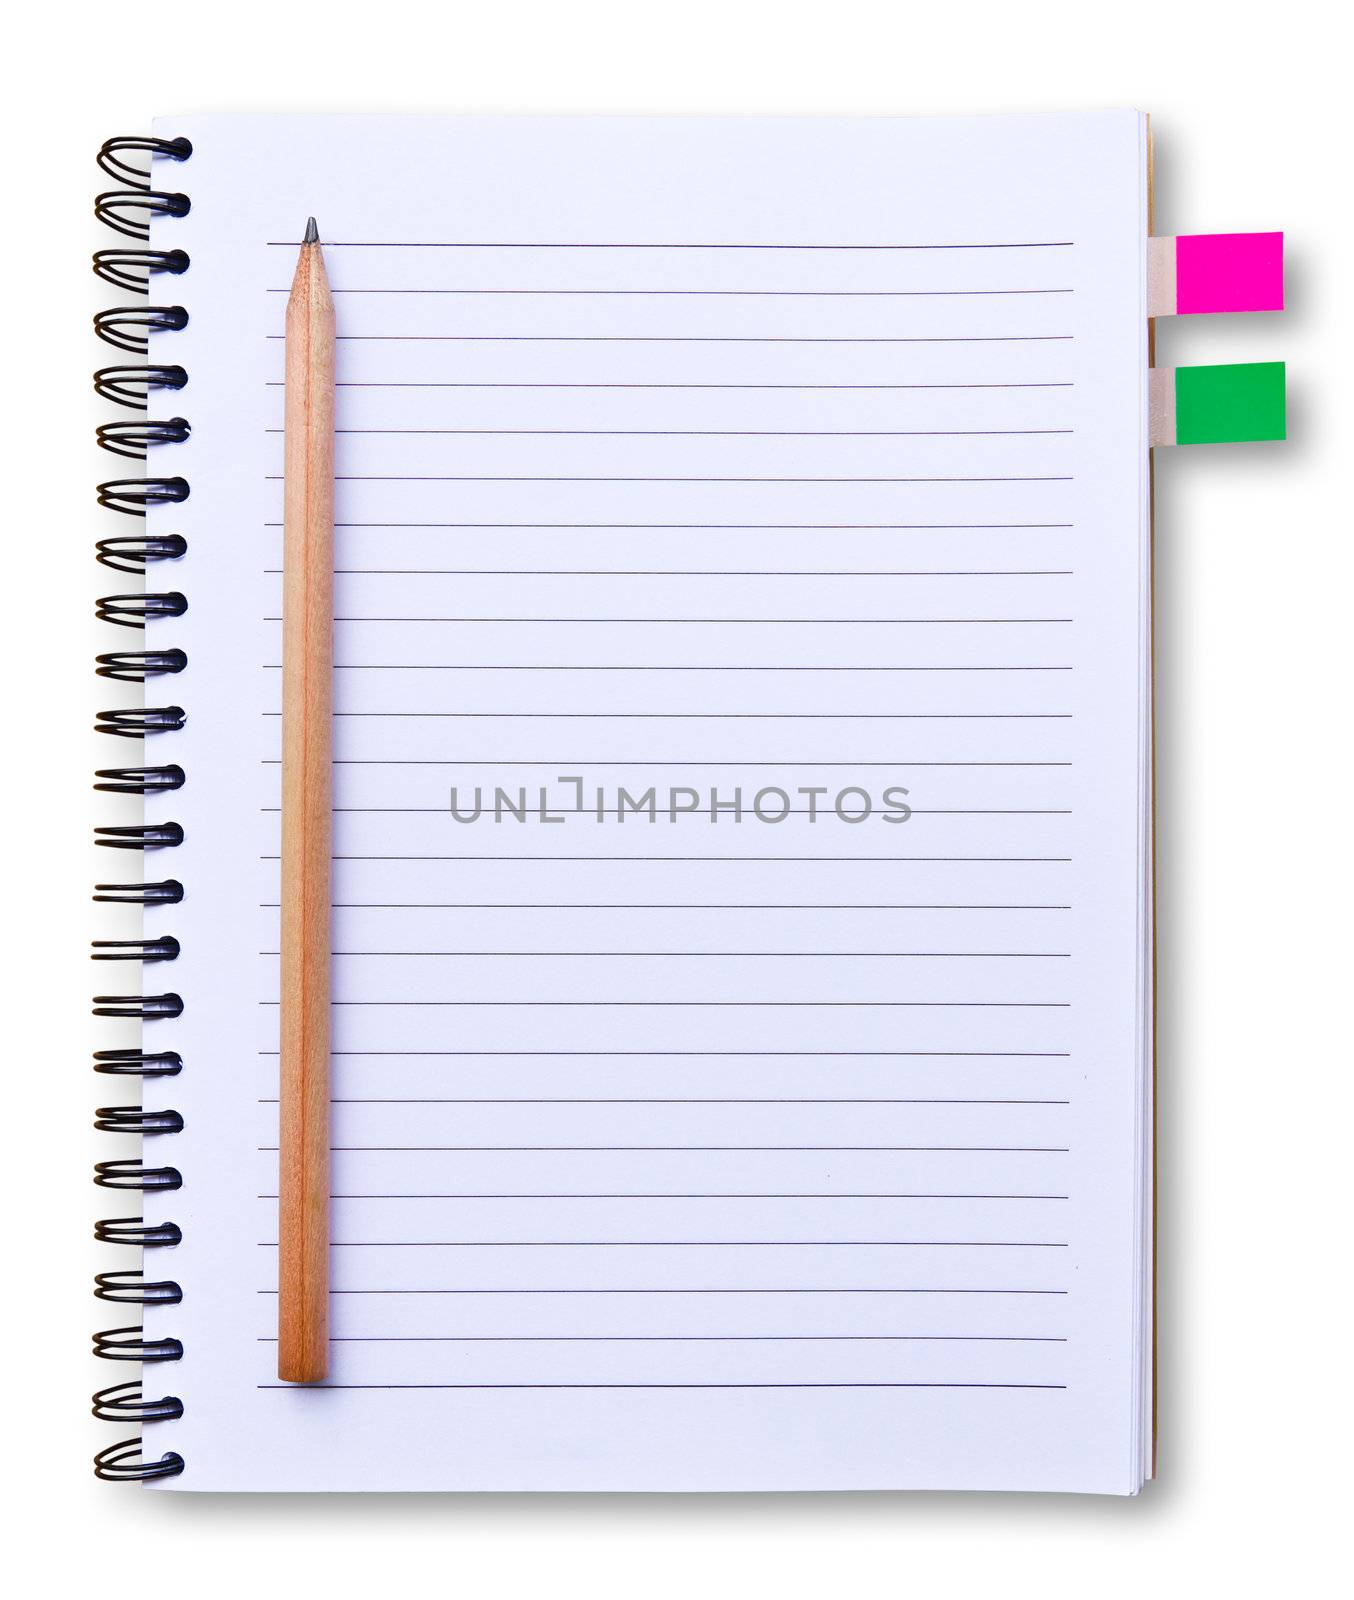 white notebook and pencil isolated